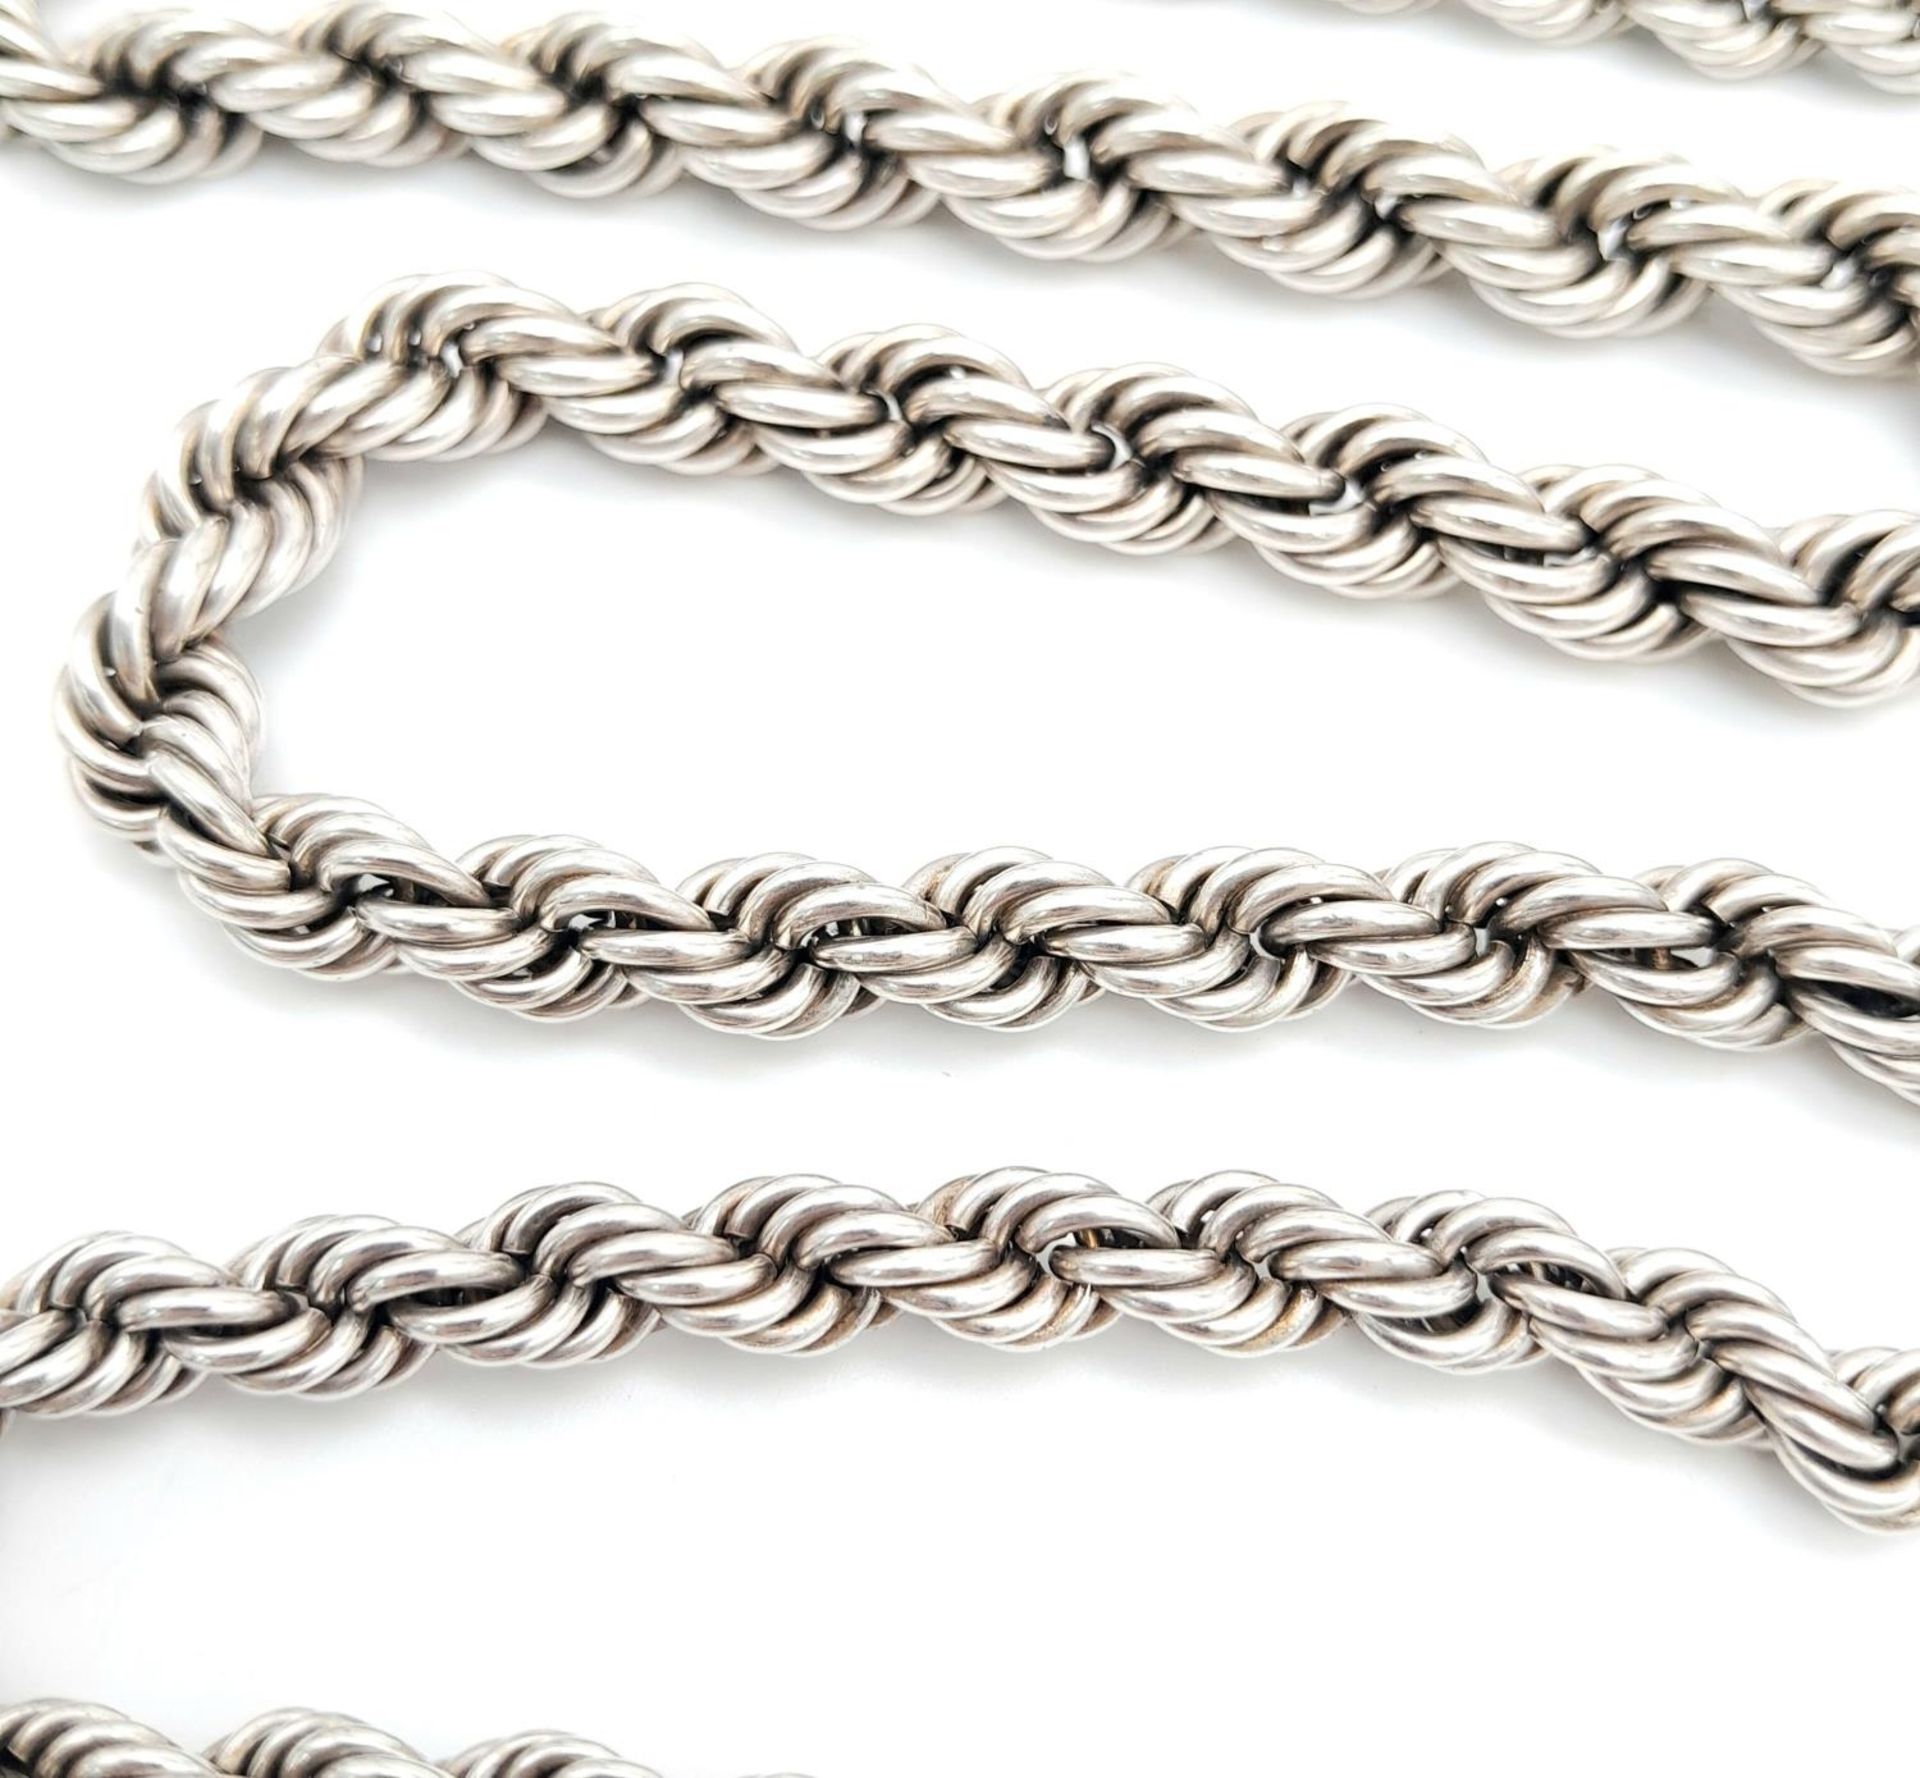 A 925 Silver Graduated Rope Chain Necklace. 89cm length, 80.48g weight. - Image 4 of 6